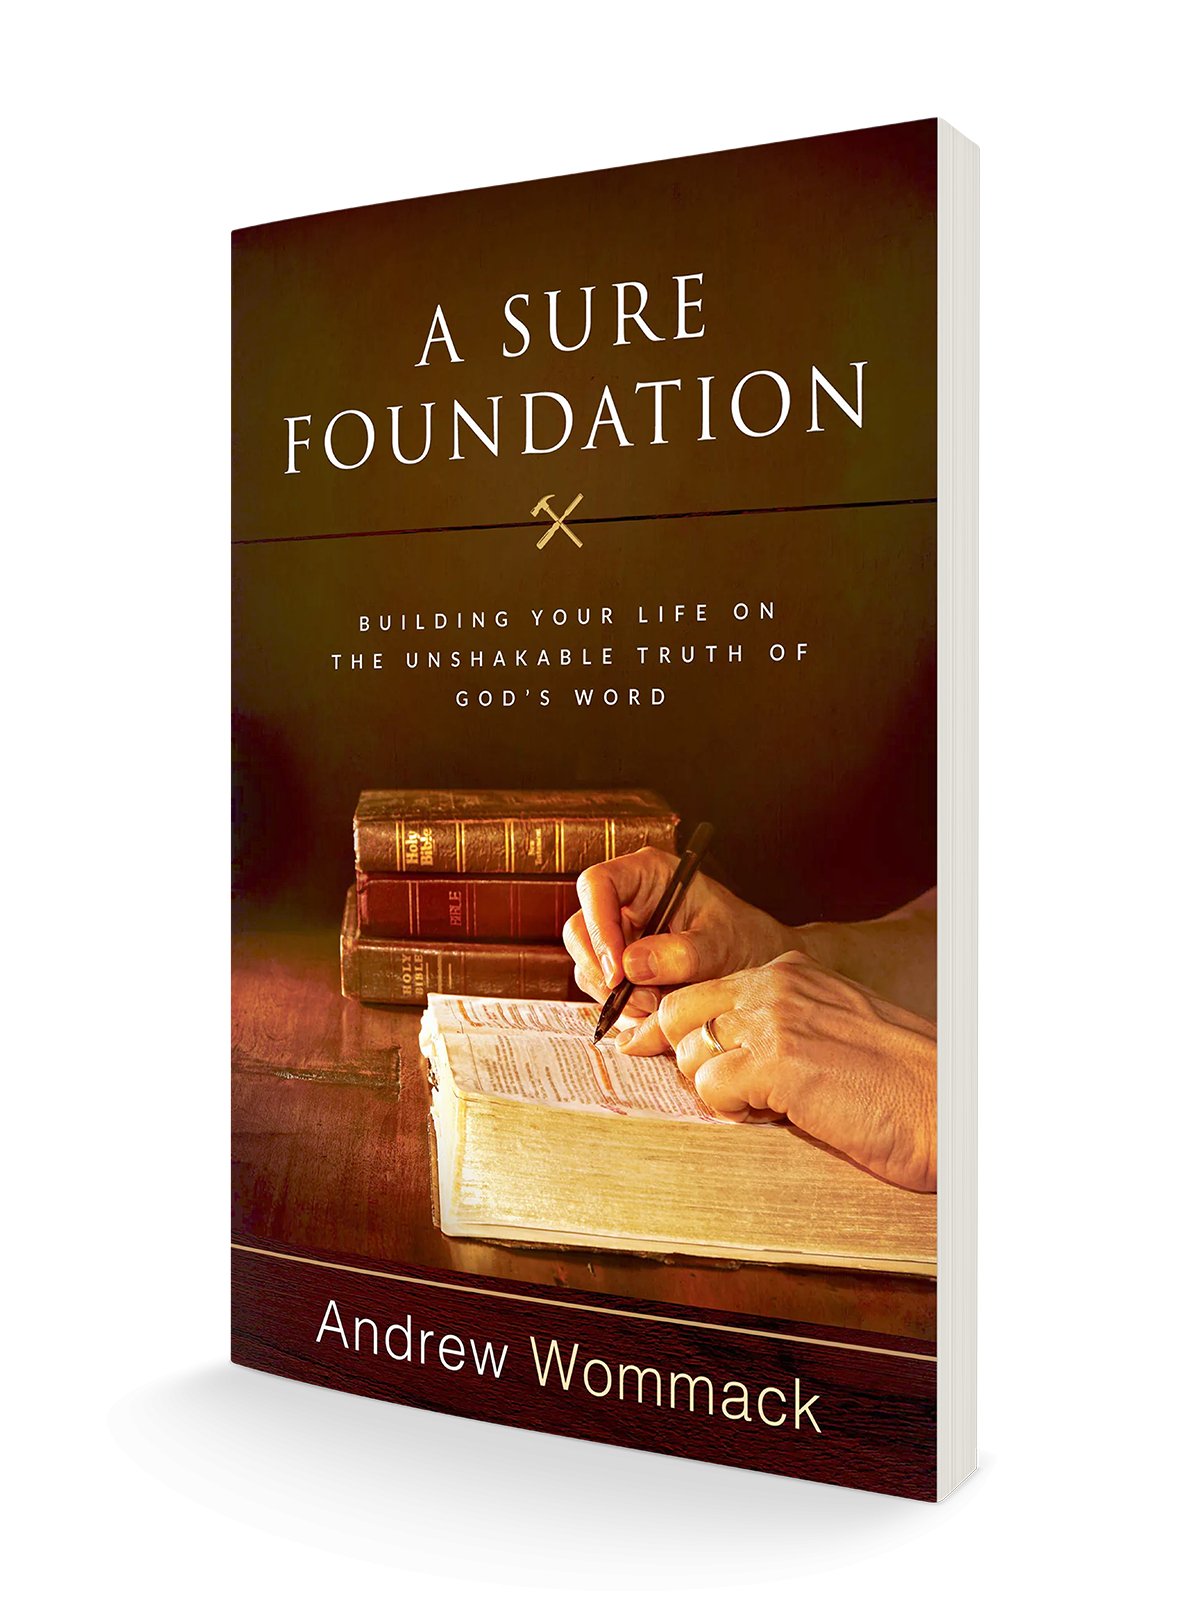 A Sure Foundation: Building Your Life on the Unshakable Truth of God’s Word